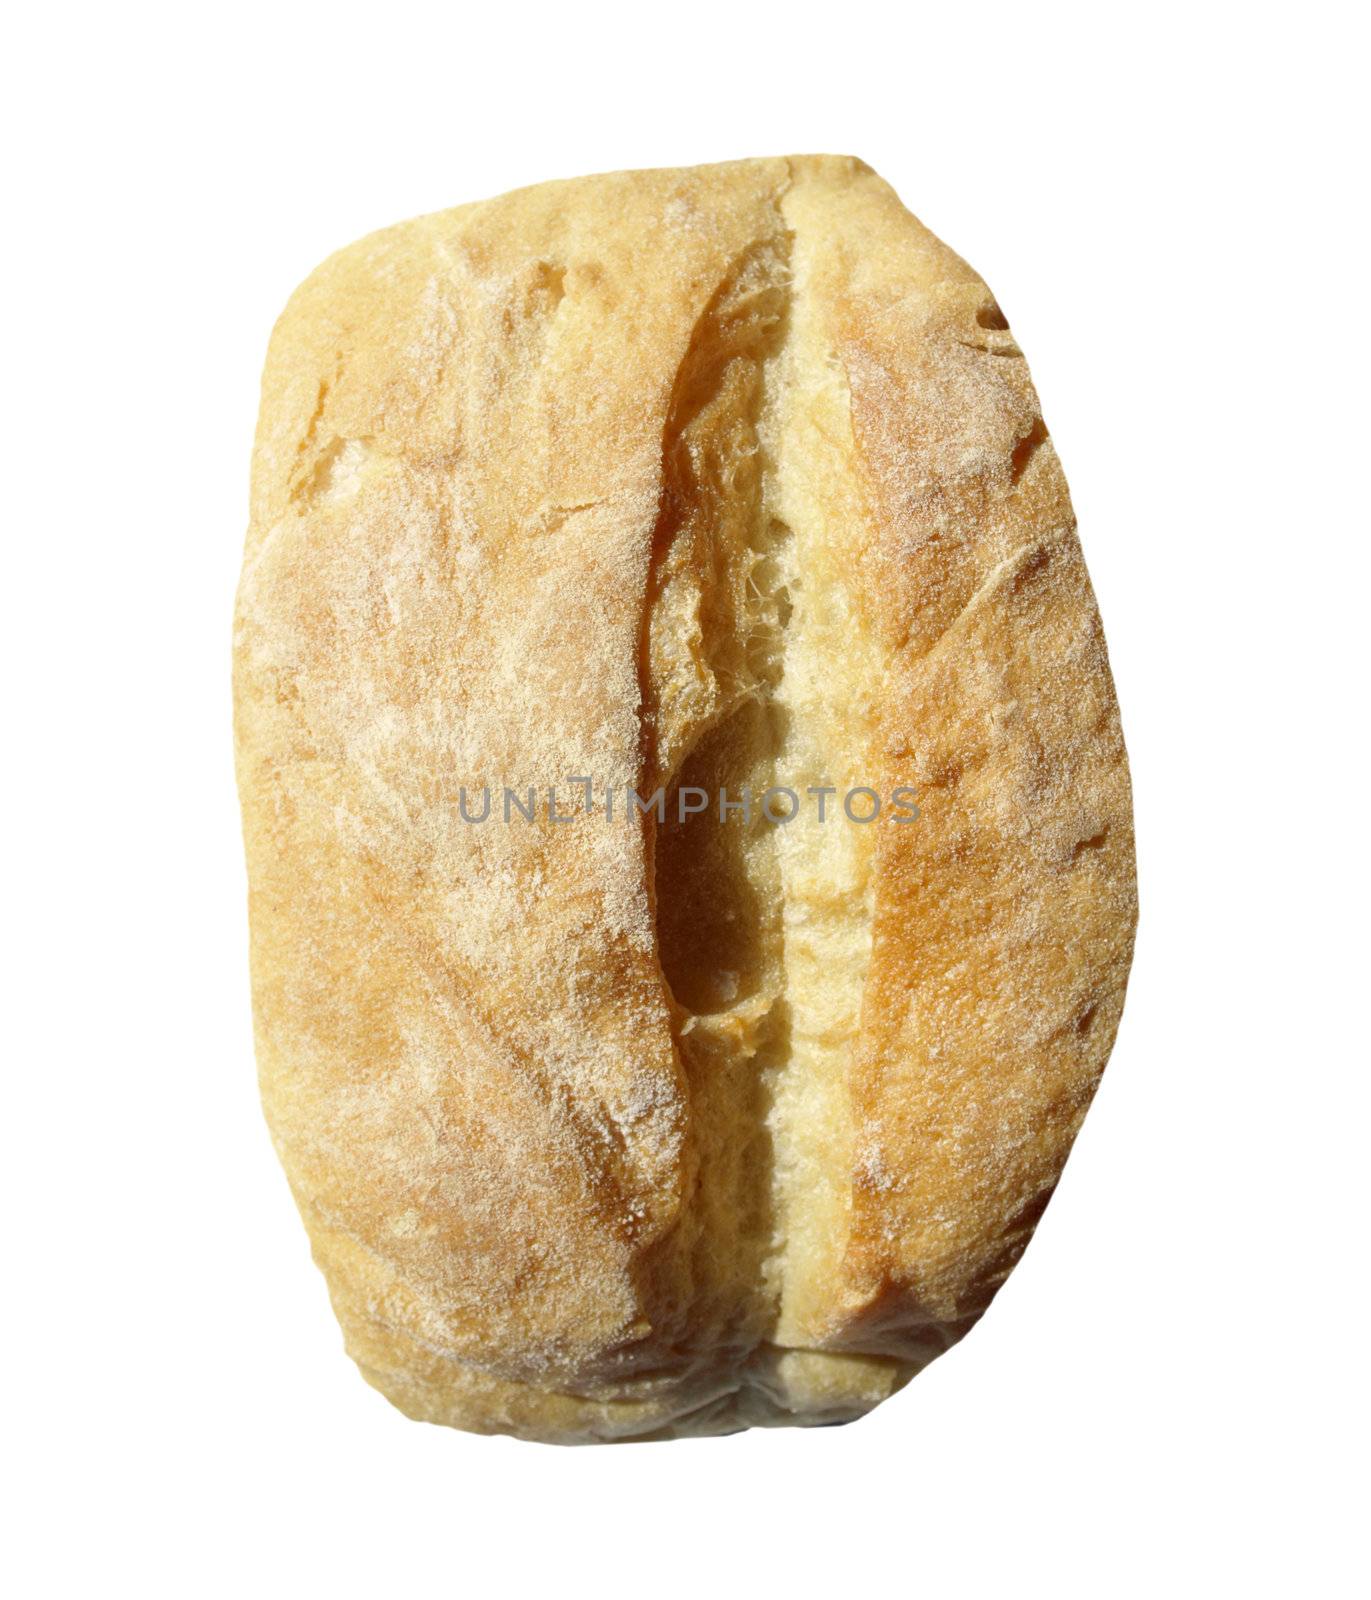 Bread food isolated over a white background